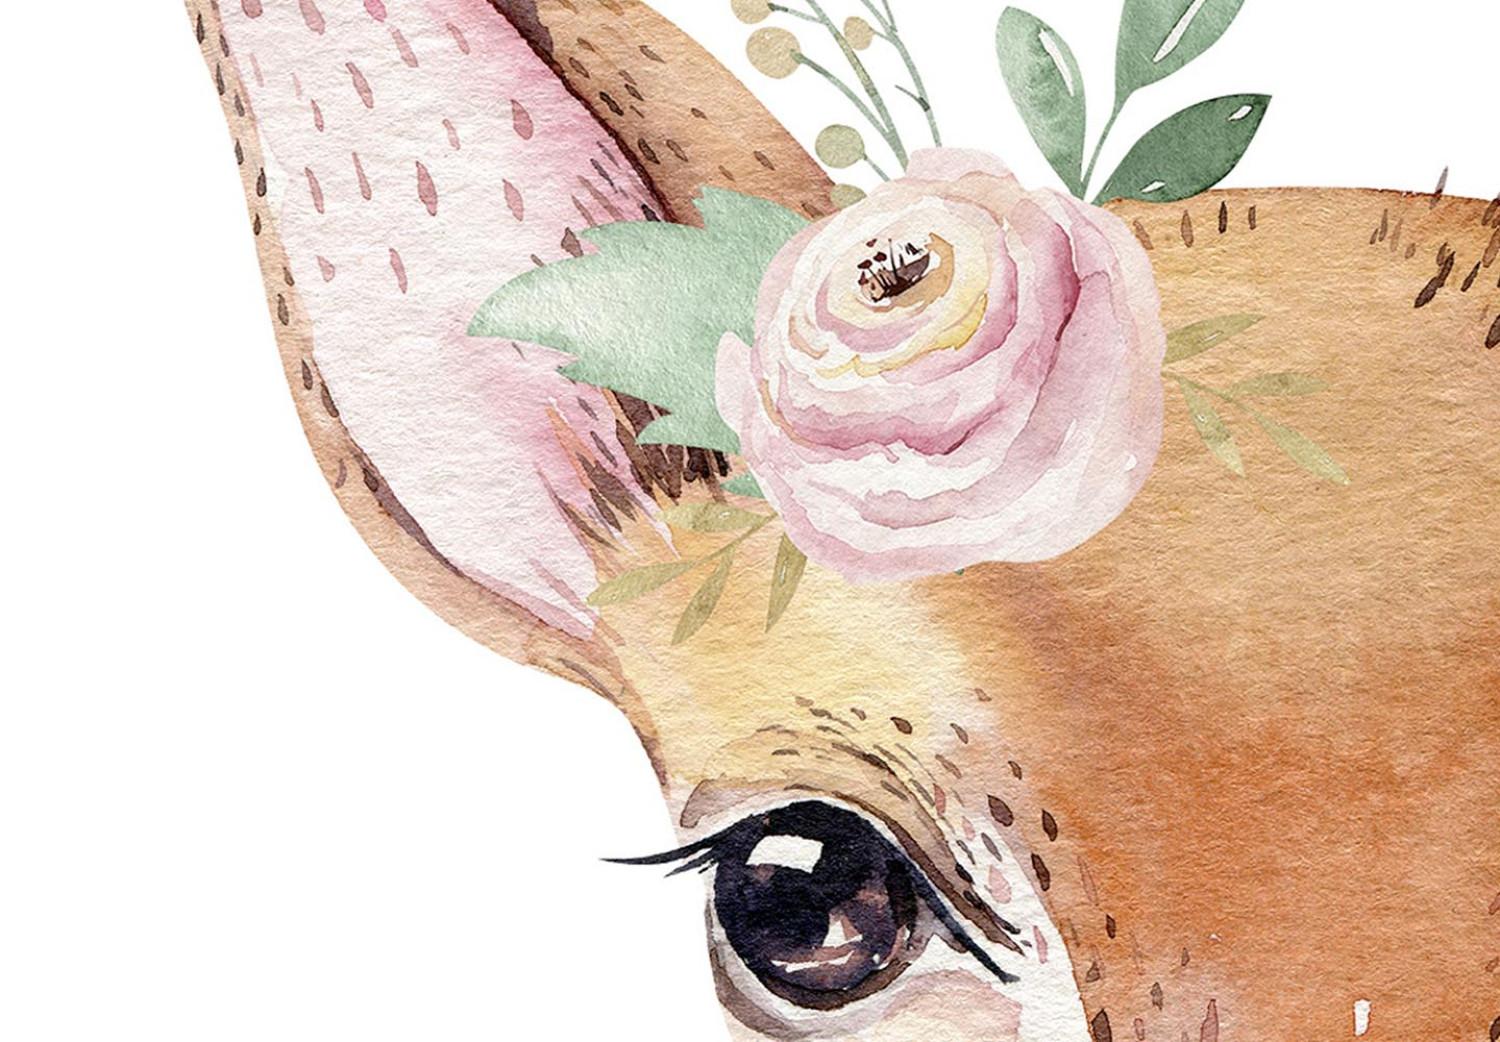 Cuadro redondos moderno Embarrassed Pet - Smiling Deer With a Small Bouquet